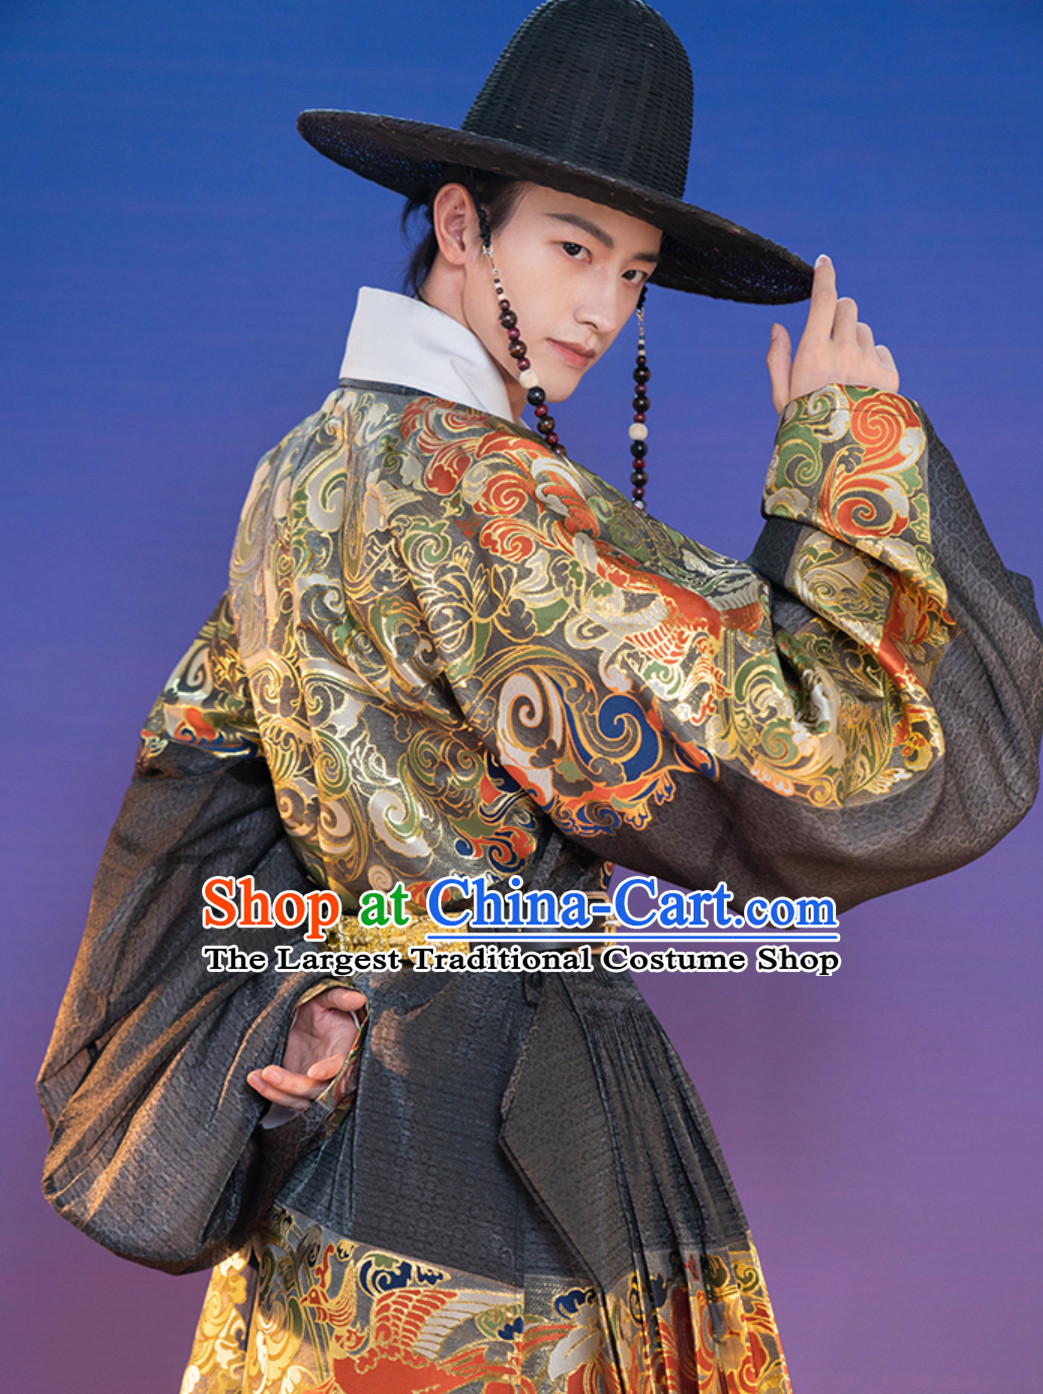 Deep Blue Color Ancient China Ming Dynasty Imperial Bodyguard Fei Yu Fu Garment Fly Fish Clothing for Men